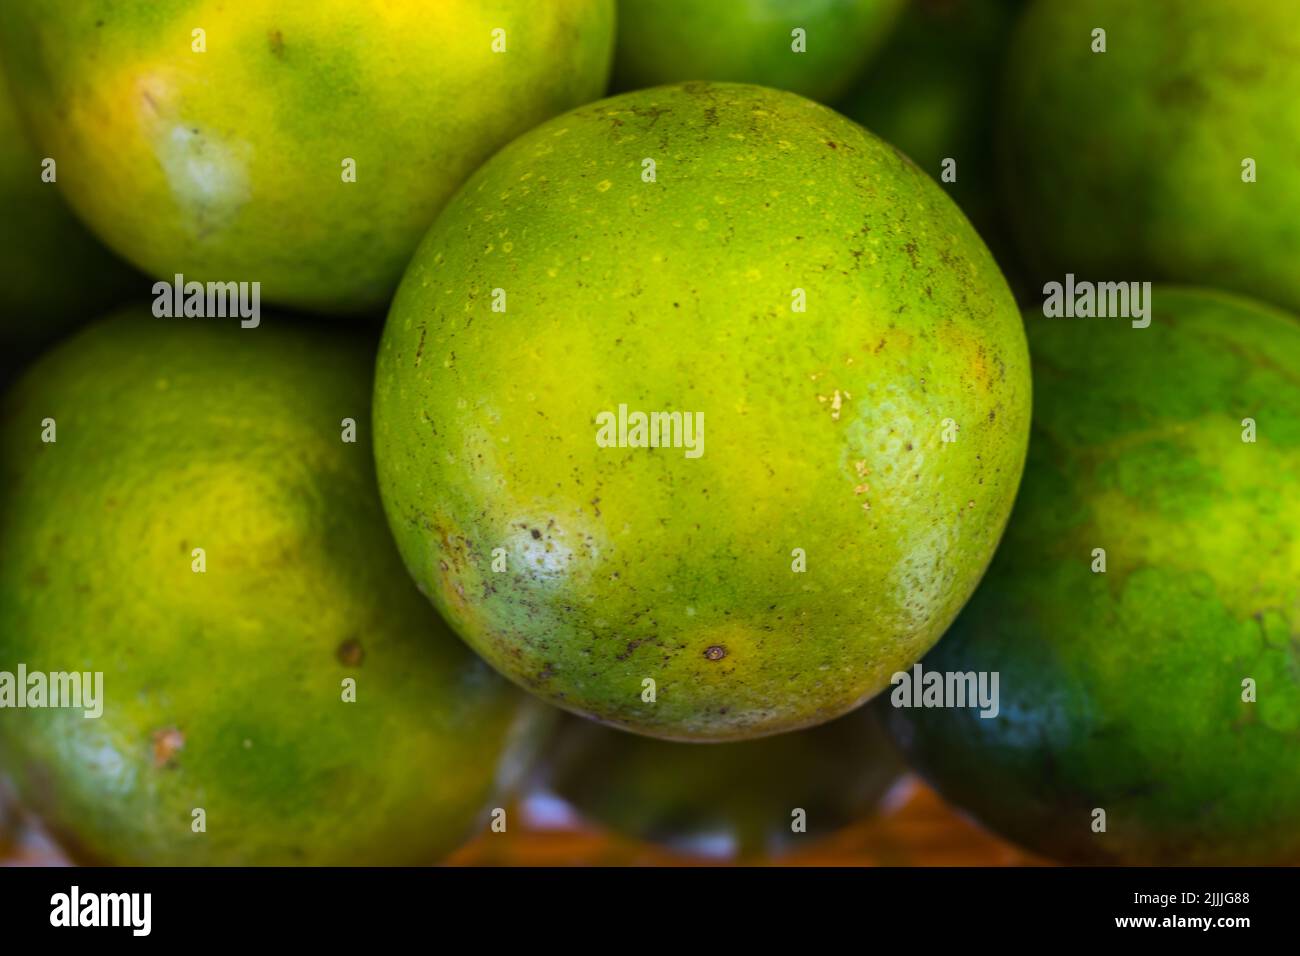 fresh organic sweet lime from farm close up from different angle Stock Photo